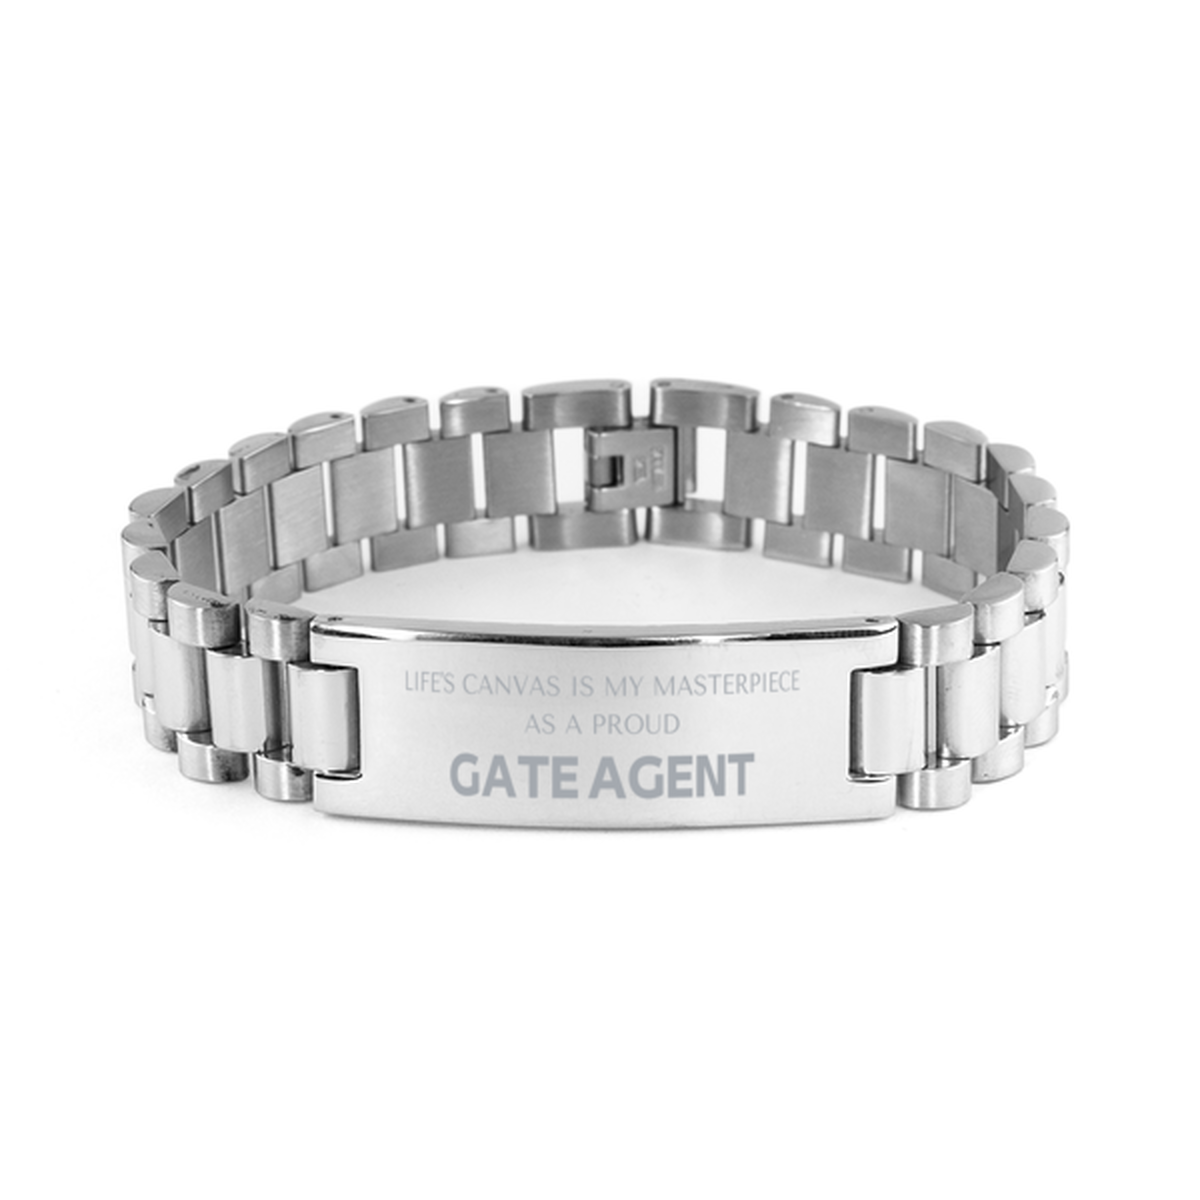 Proud Gate Agent Gifts, Life's canvas is my masterpiece, Epic Birthday Christmas Unique Ladder Stainless Steel Bracelet For Gate Agent, Coworkers, Men, Women, Friends